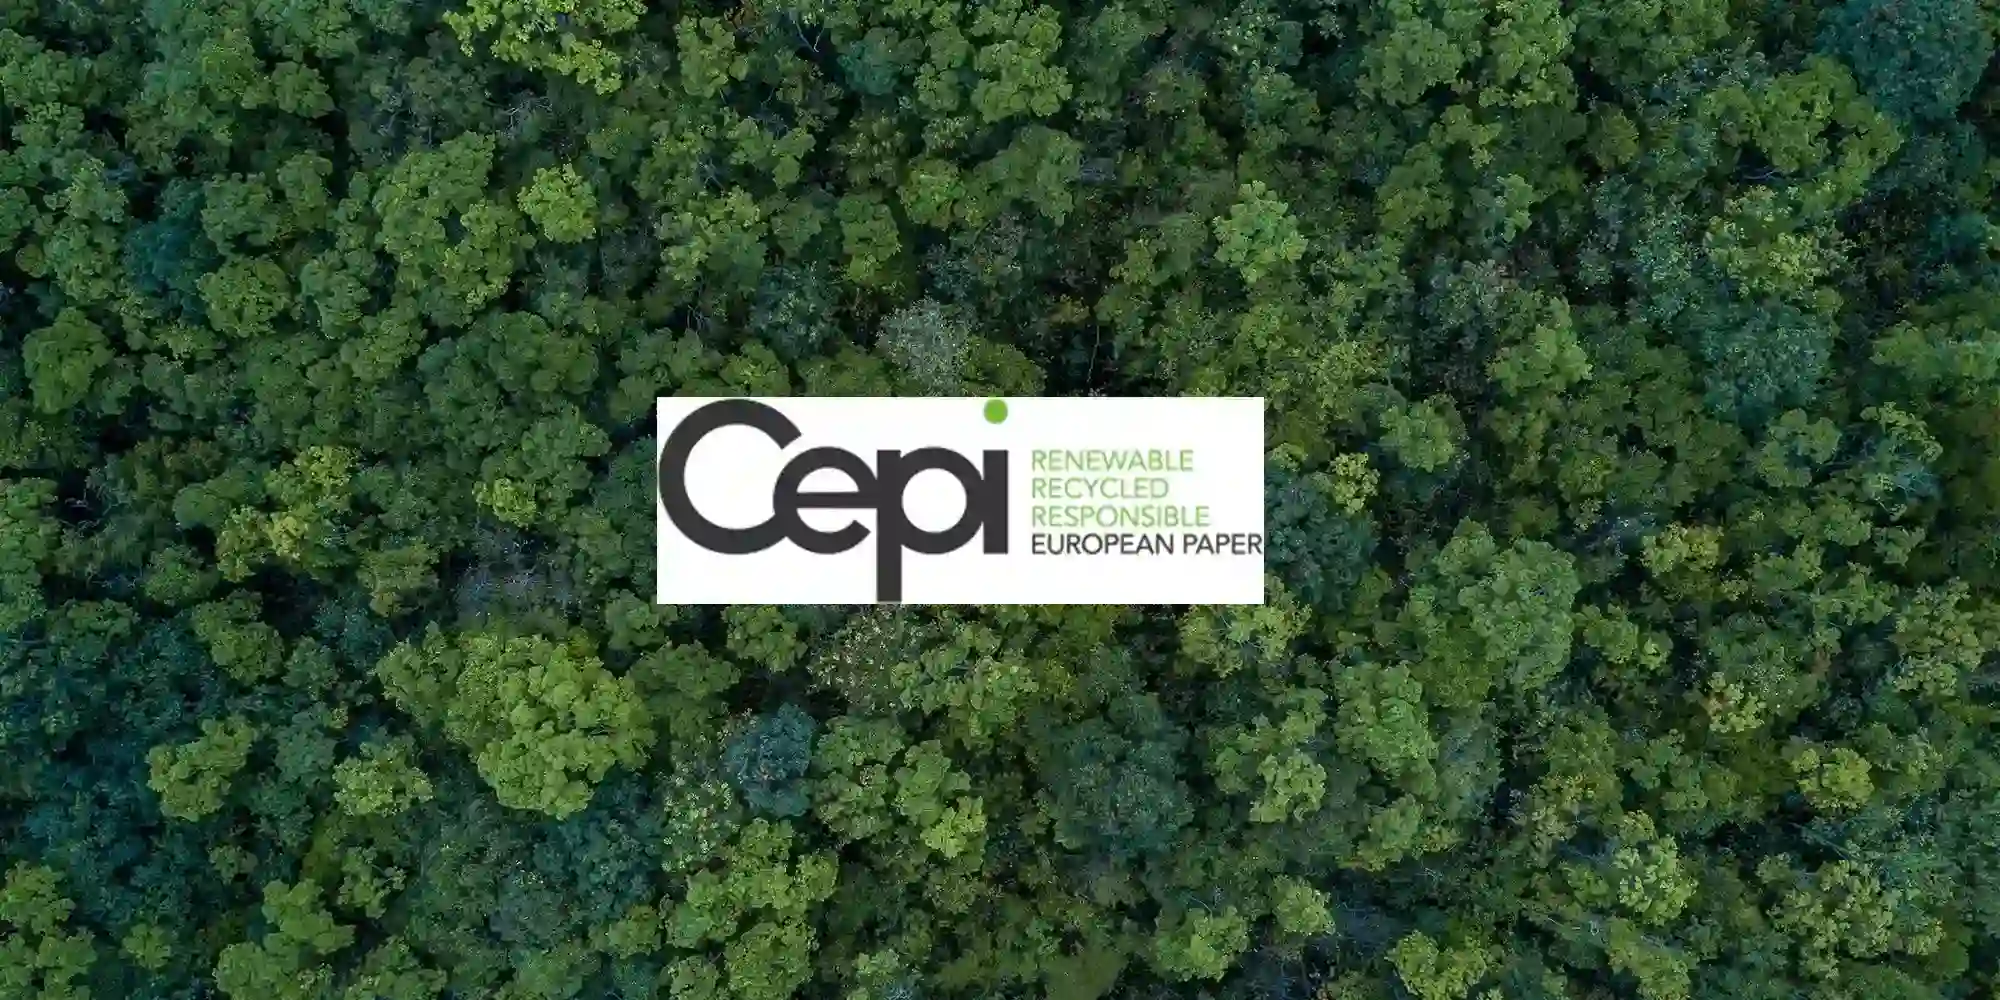 Cepi renewable, recycled, responsible, European paper logo with a top-down view of a green forest.